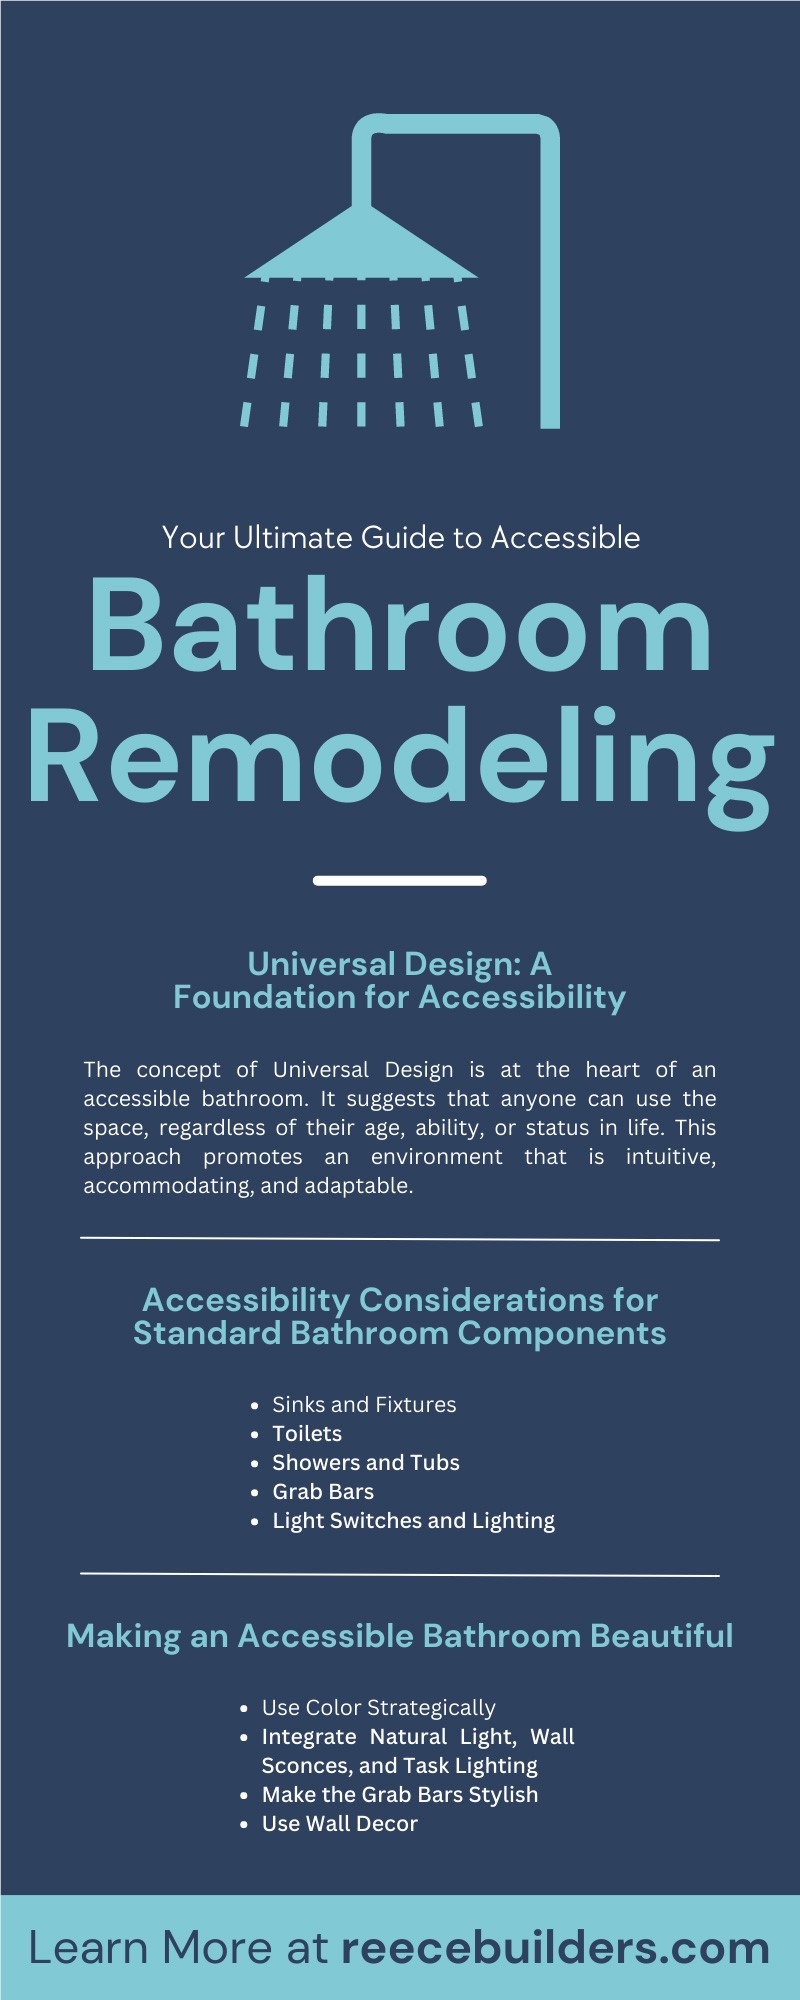 Your Ultimate Guide to Accessible Bathroom Remodeling